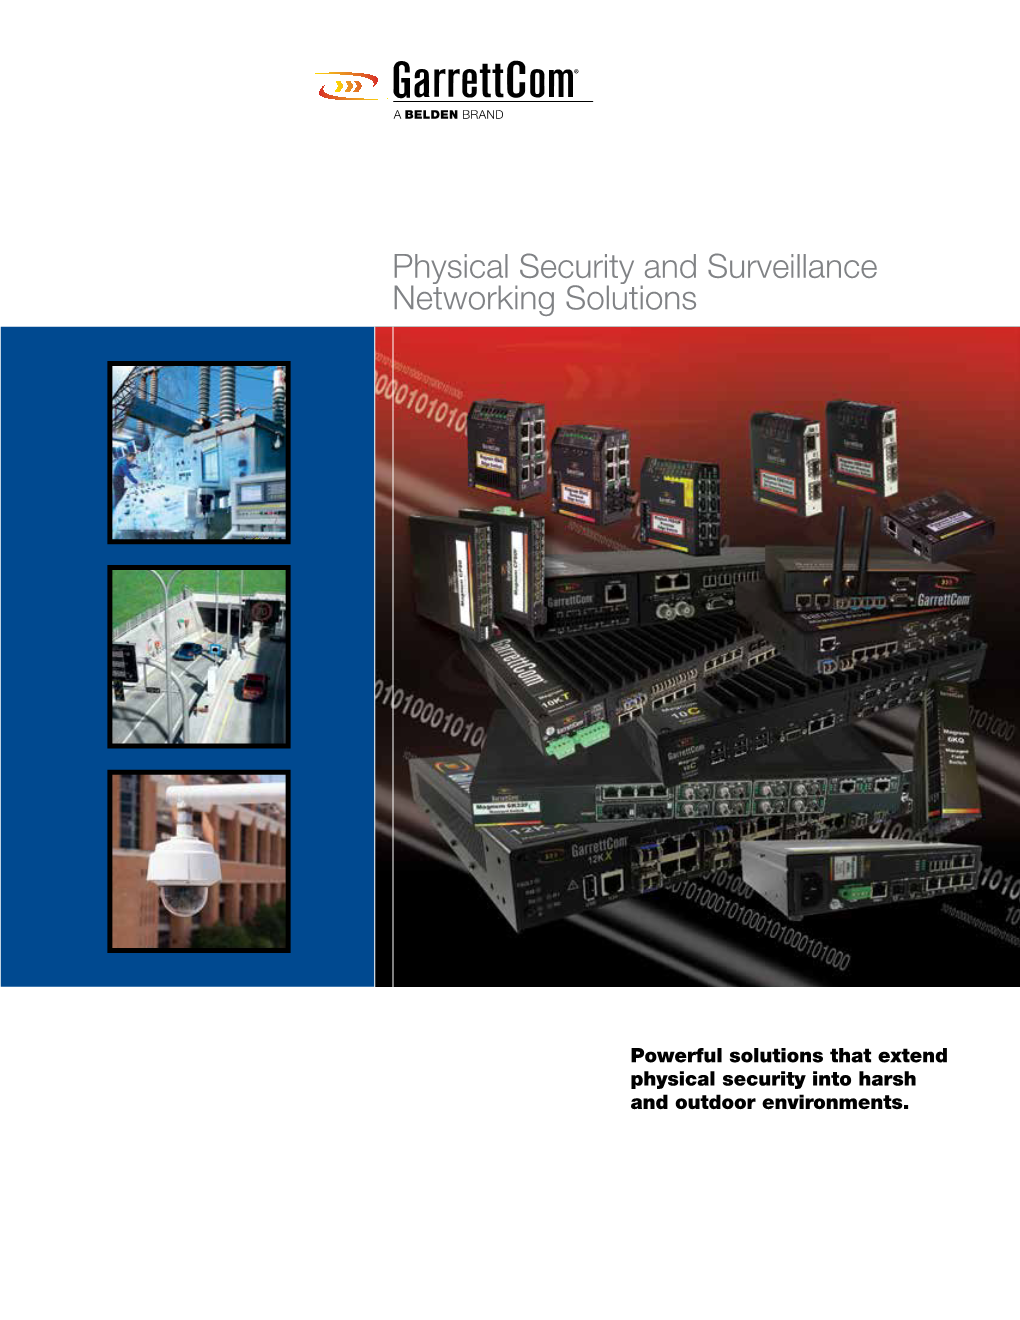 Physical Security and Surveillance Networking Solutions